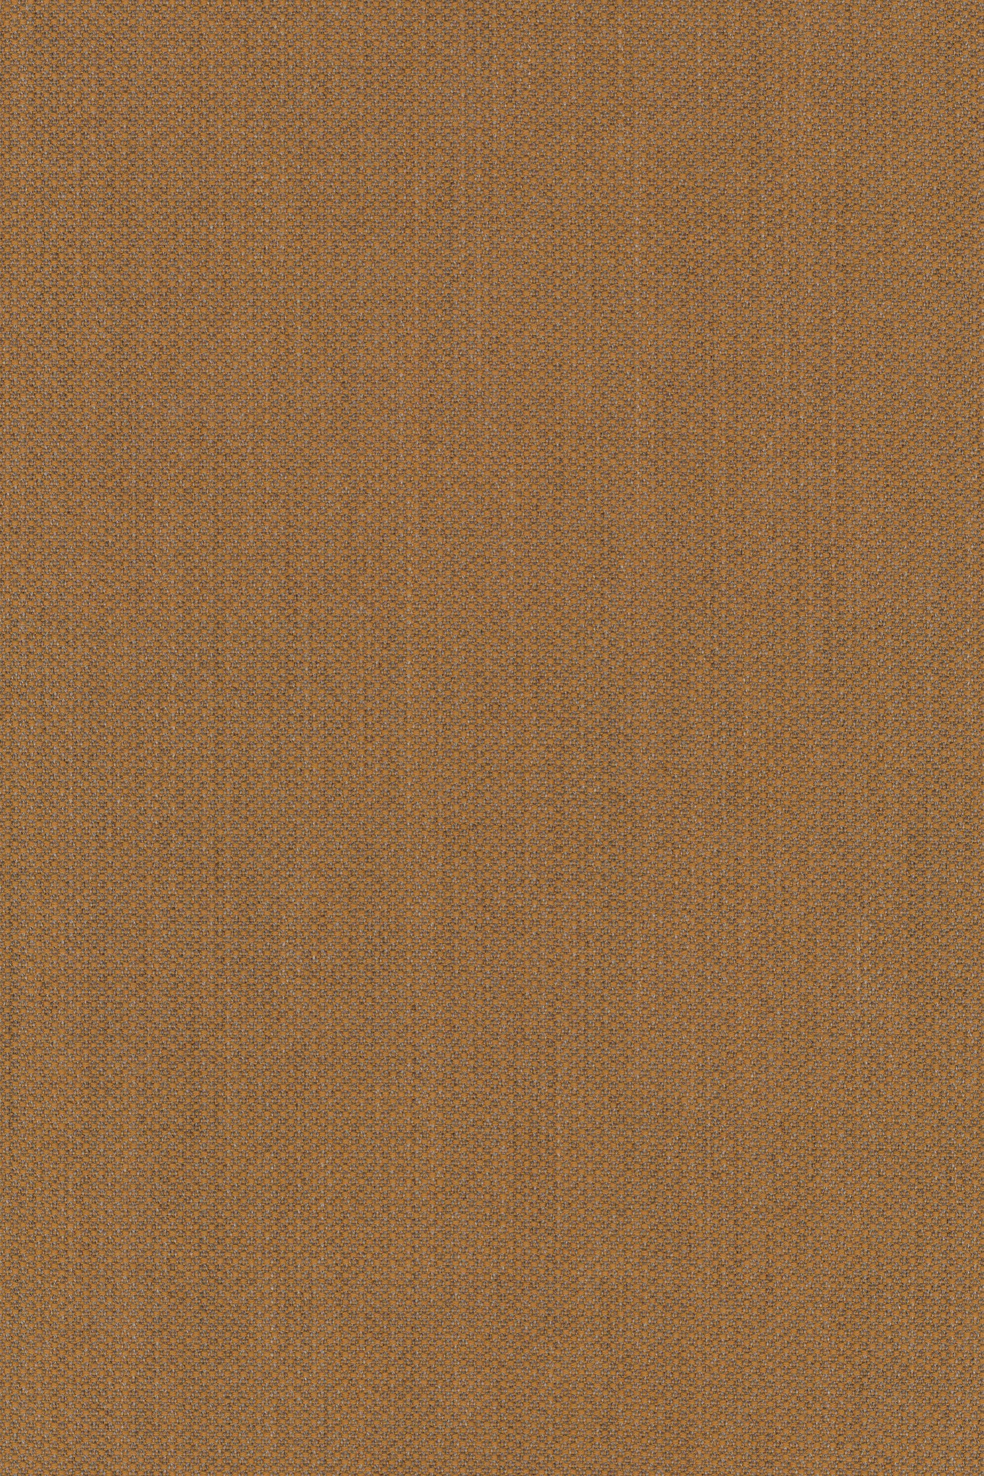 Fabric sample Fiord 451 brown